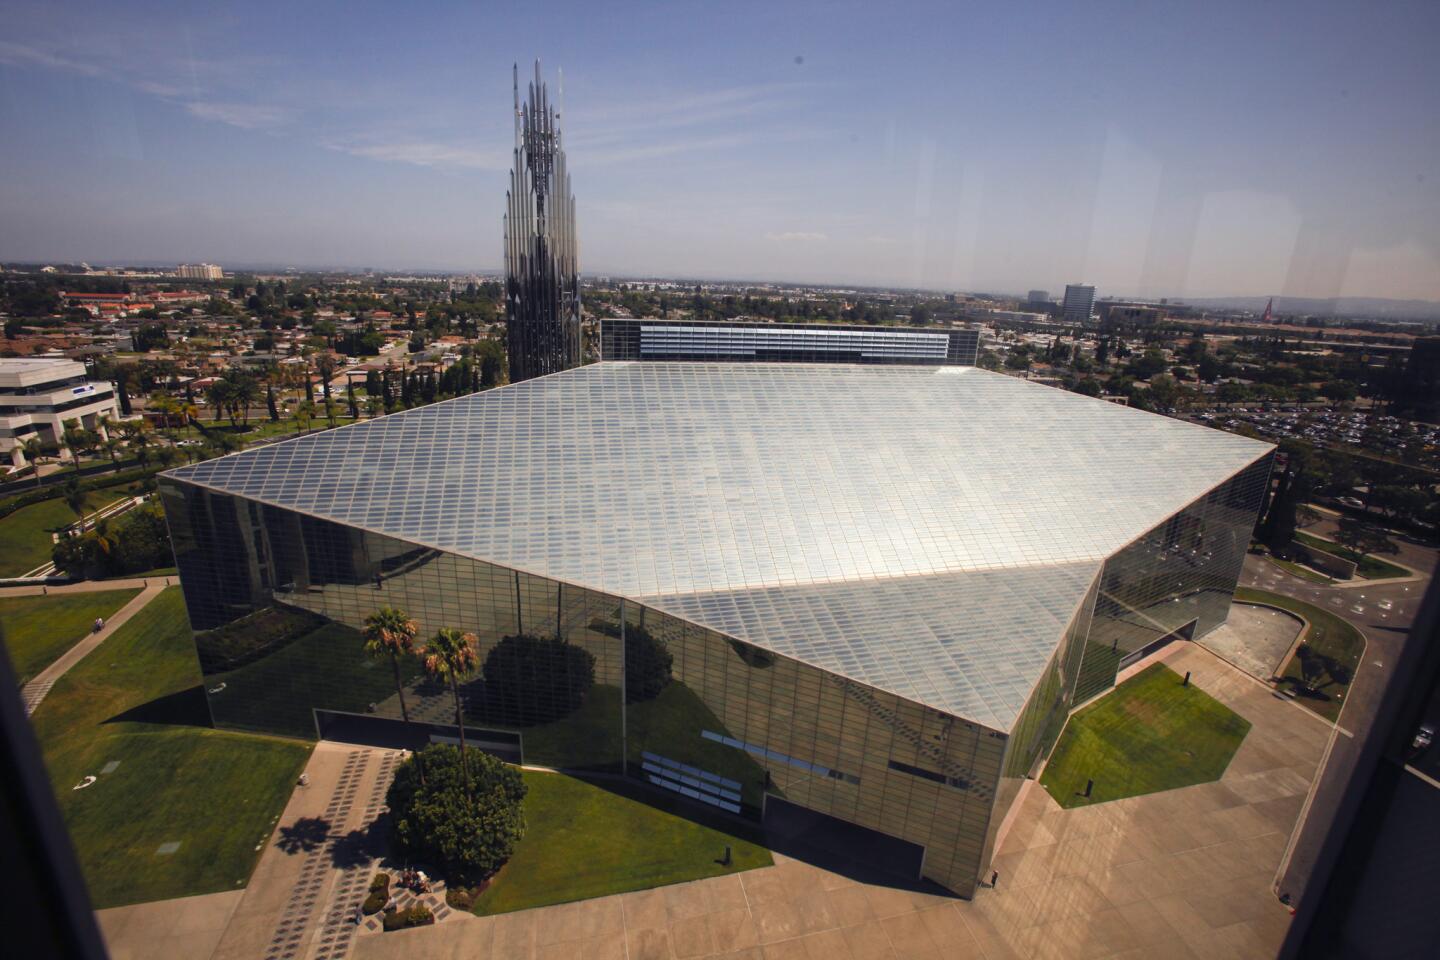 The former Crystal Cathedral in Garden Grove is being transformed into the Christ Cathedral by the Roman Catholic Diocese of Orange. The 415-foot-long cathedral, designed by famed architect Philip Johnson, is covered by about 10,000 windows and will eventually be retrofitted on the inside to accommodate traditional Catholic Church layout and rituals.